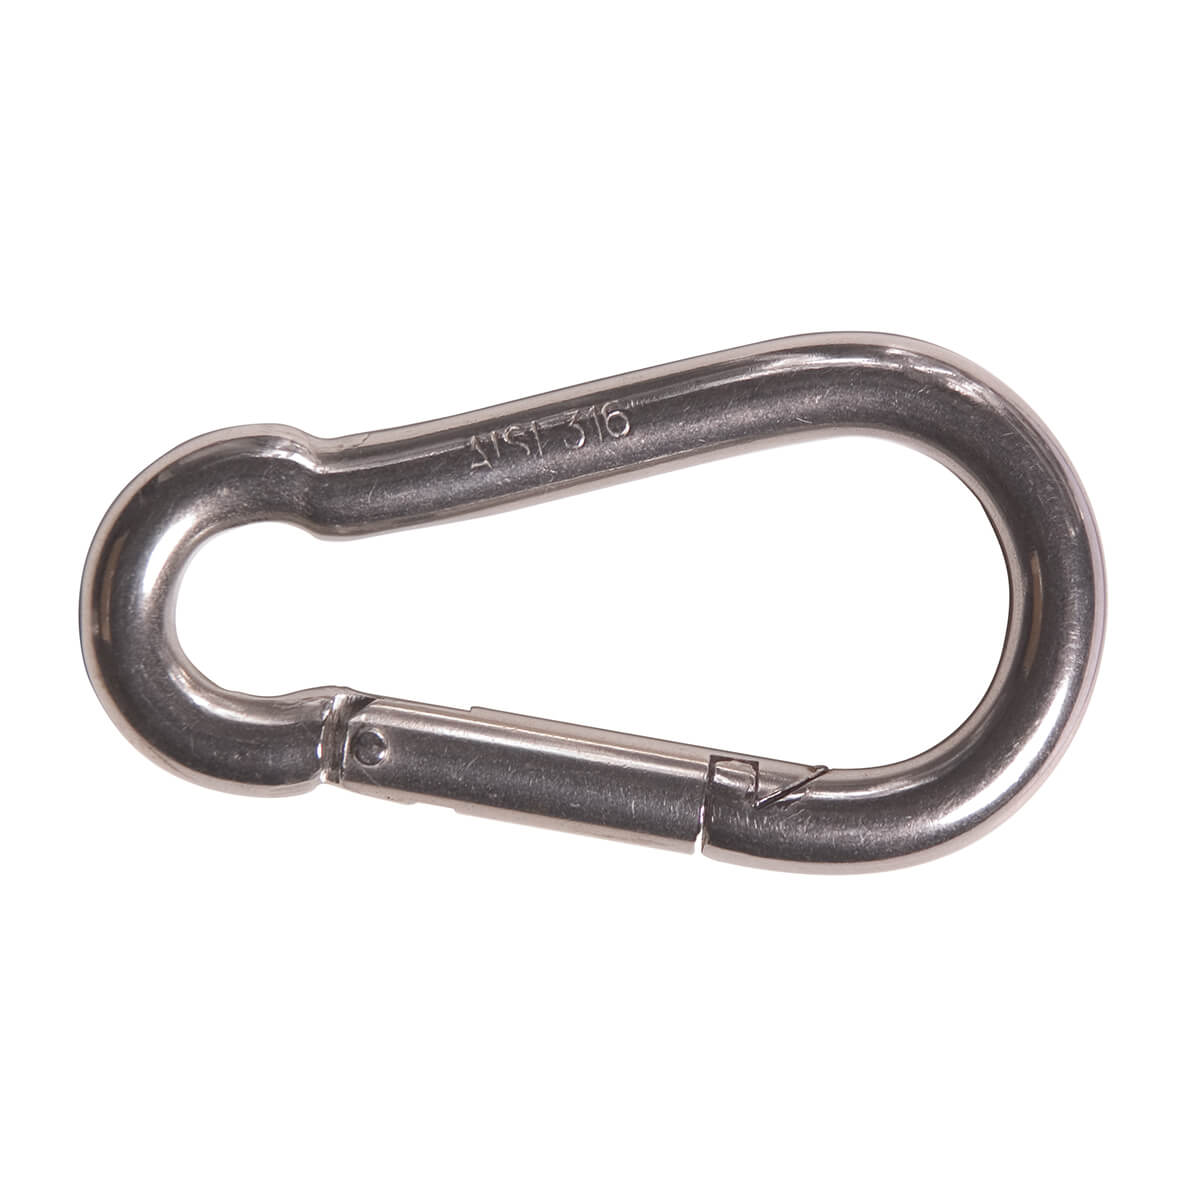 Carbine Snap Hook - Stainless Steel